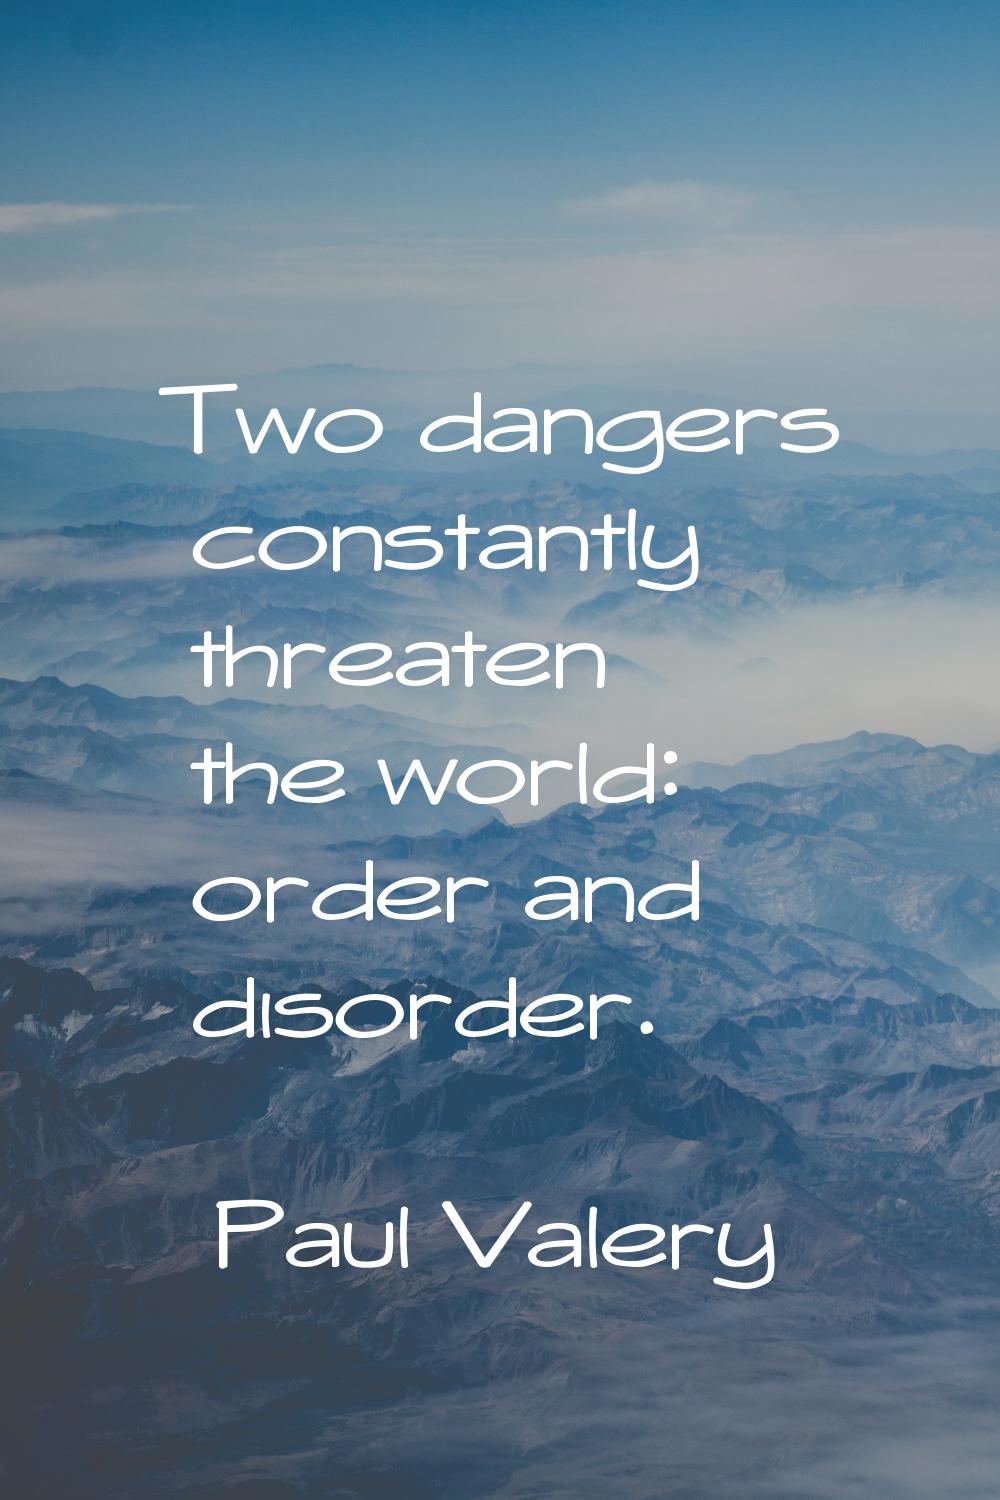 Two dangers constantly threaten the world: order and disorder.